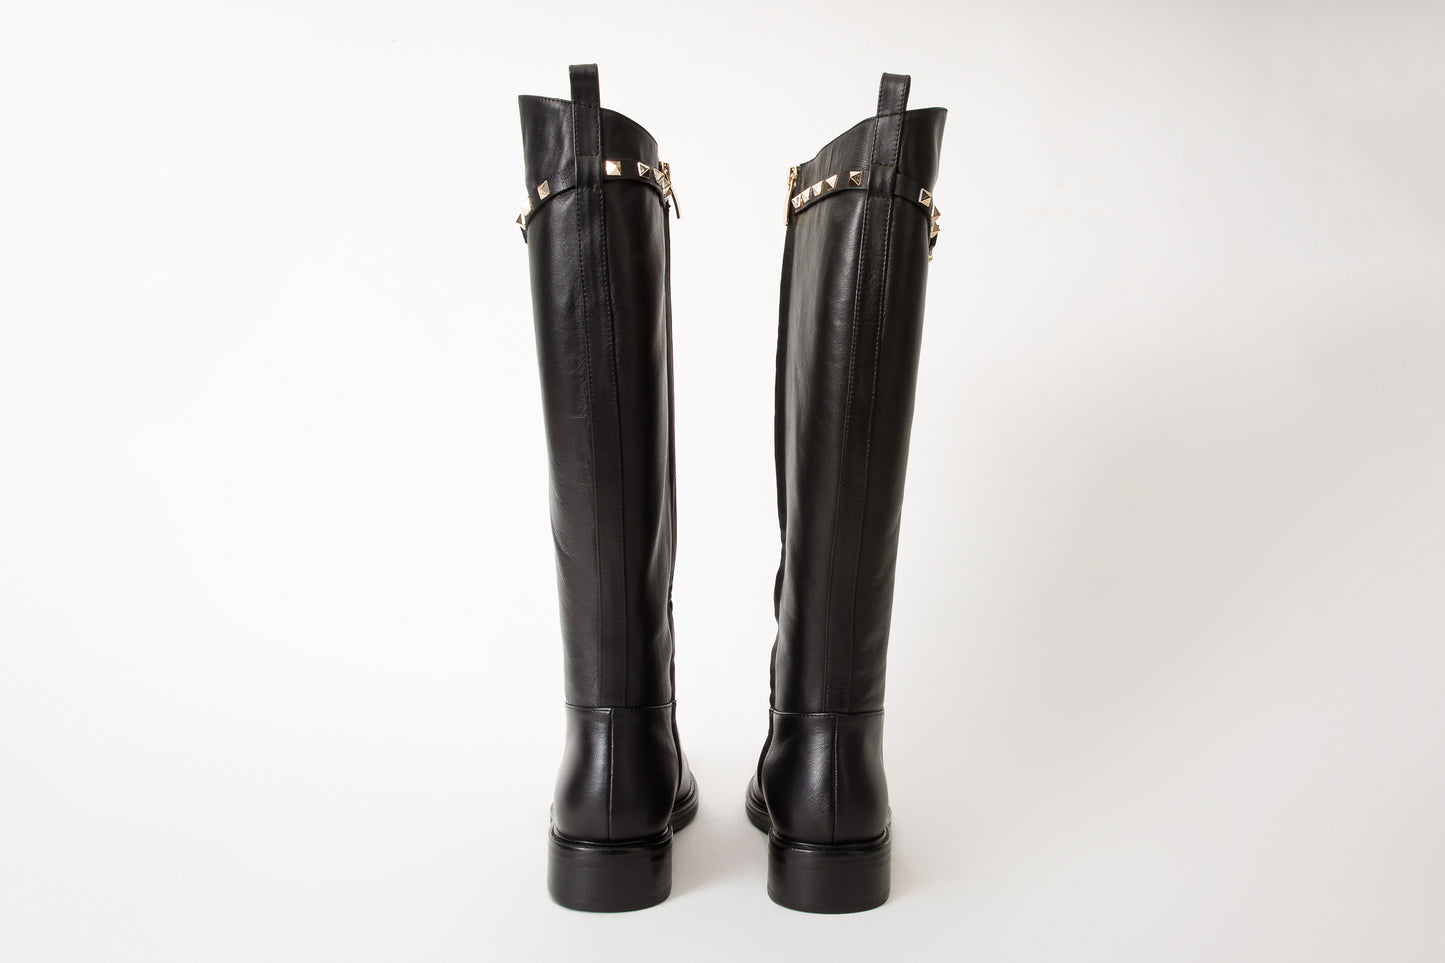 The Rica Black Leather Knee High Women Boot